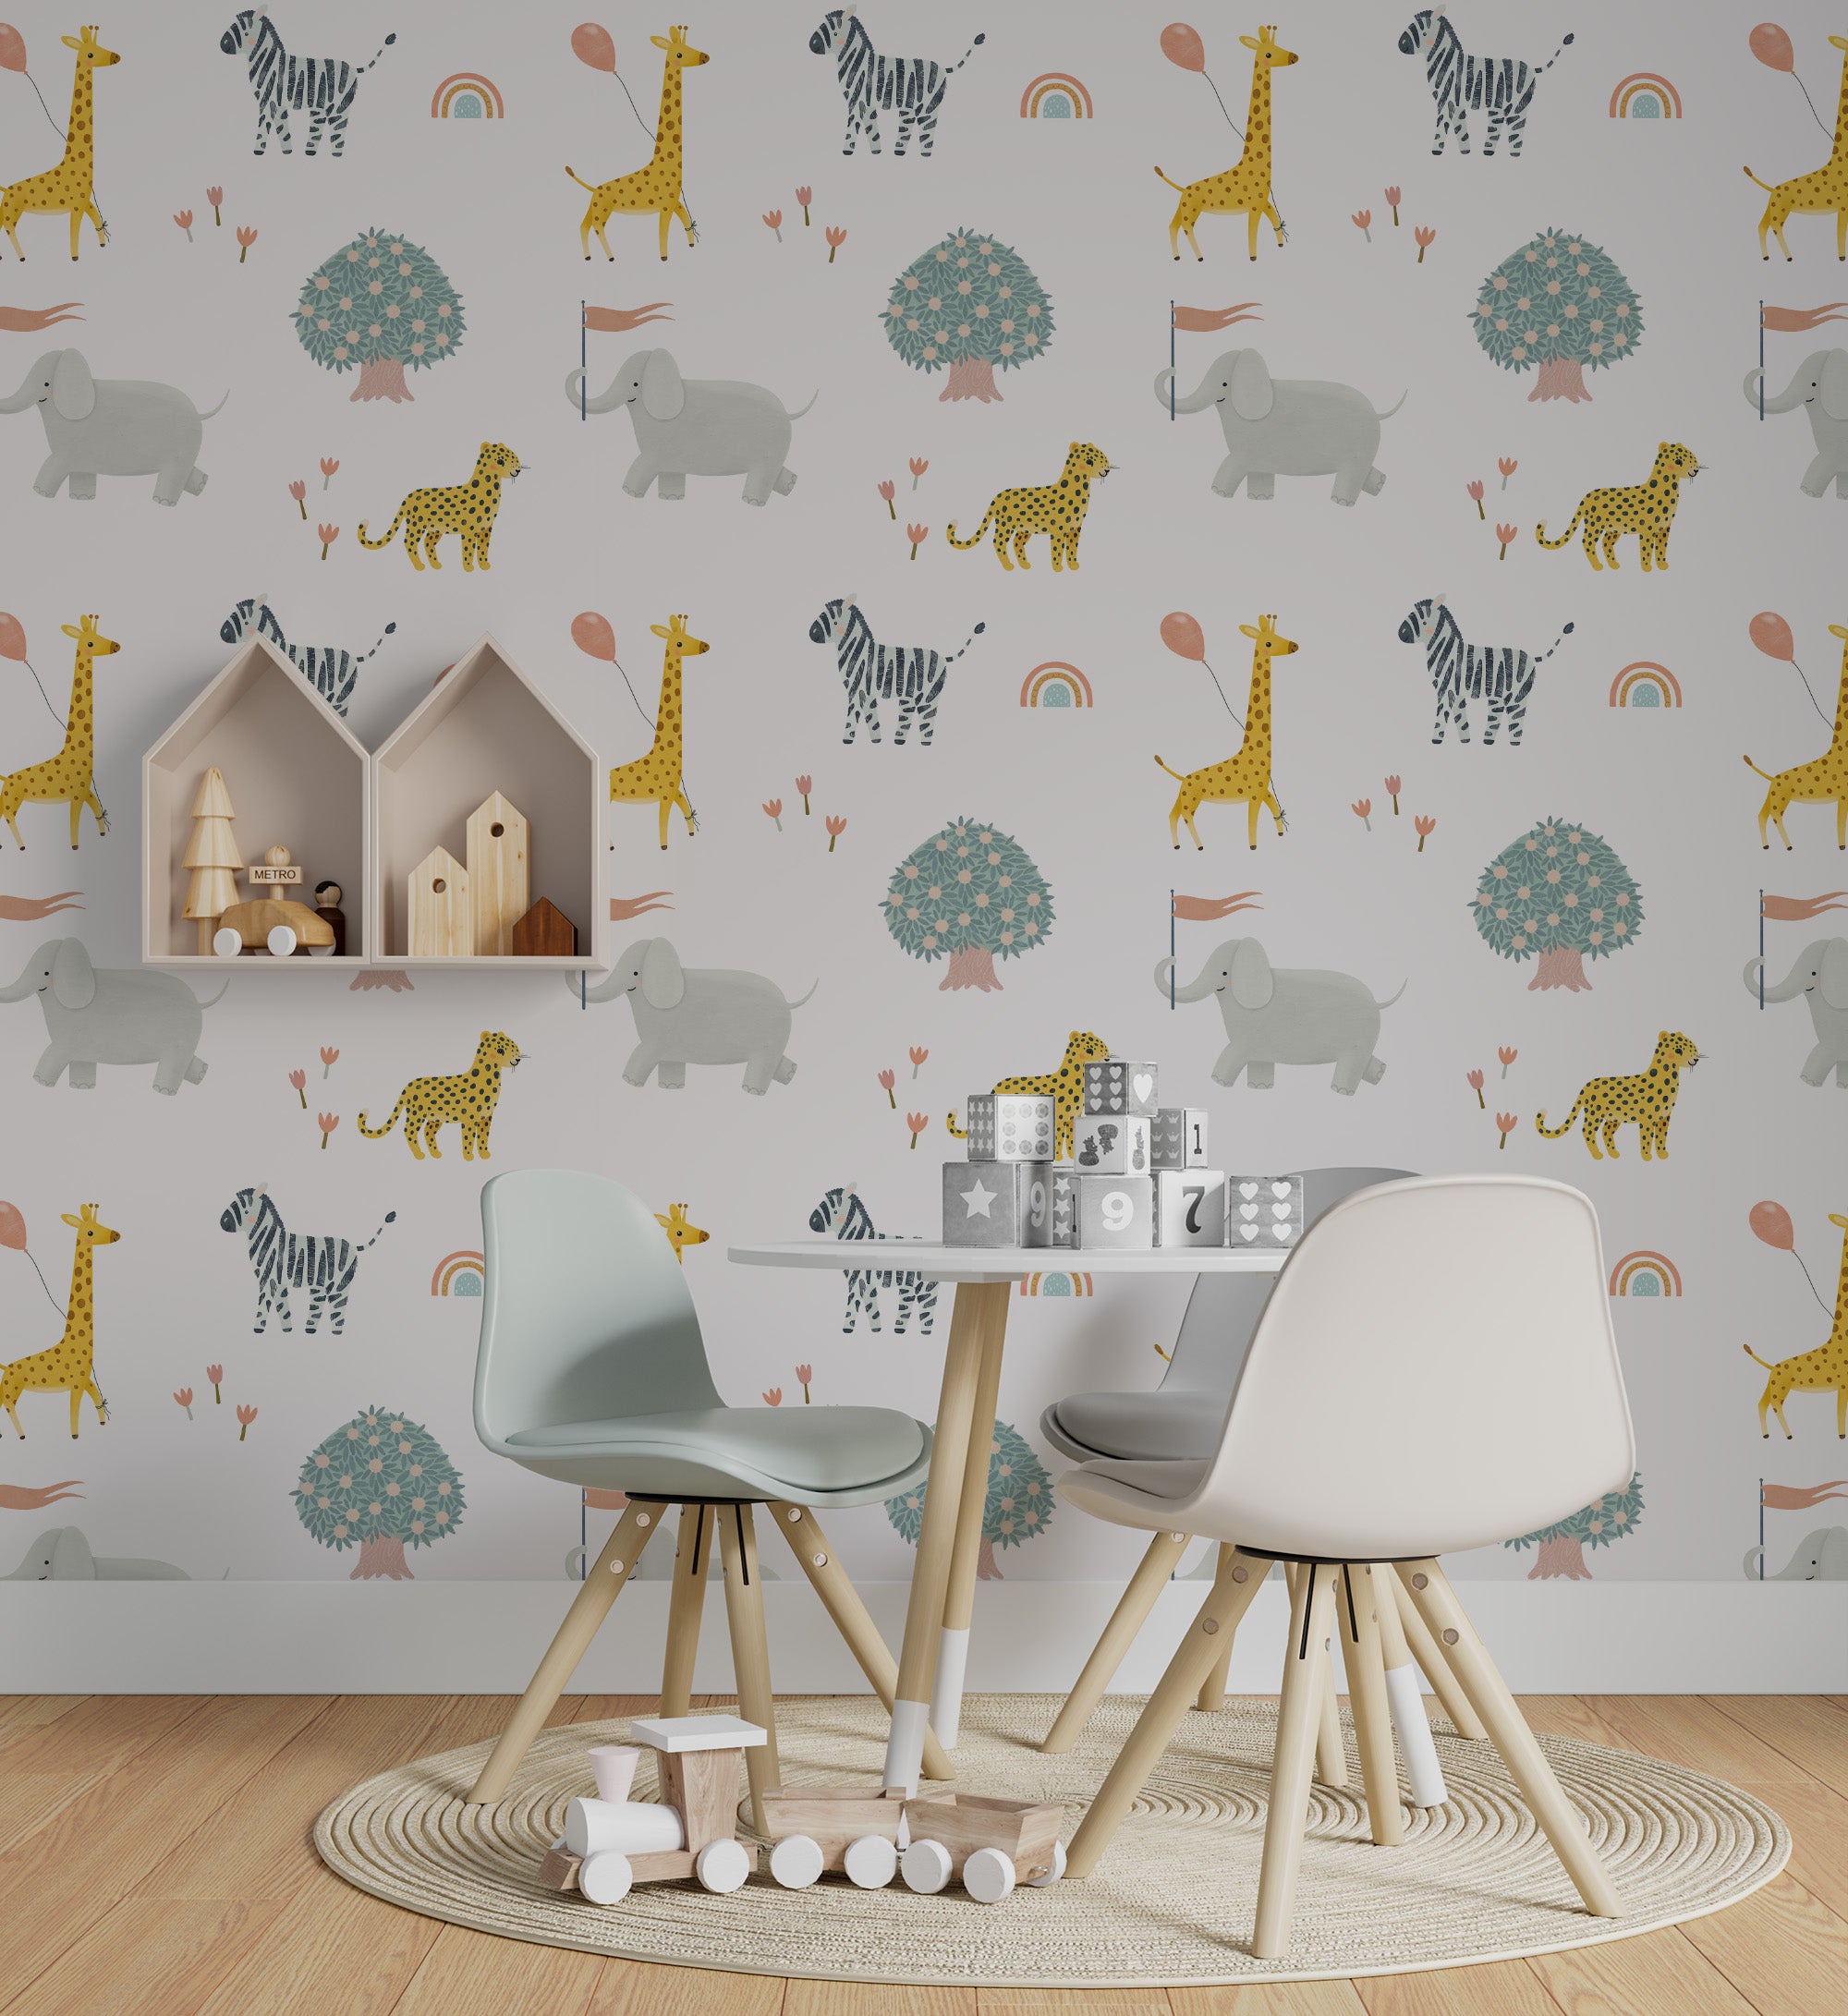 A children's playroom decorated with Safari Adventure Wallpaper showing elephants, giraffes, zebras, and cheetahs in soft colors. The room includes a small kids' table with chairs, a circular rug, and wooden toys enhancing the playful, adventurous theme.